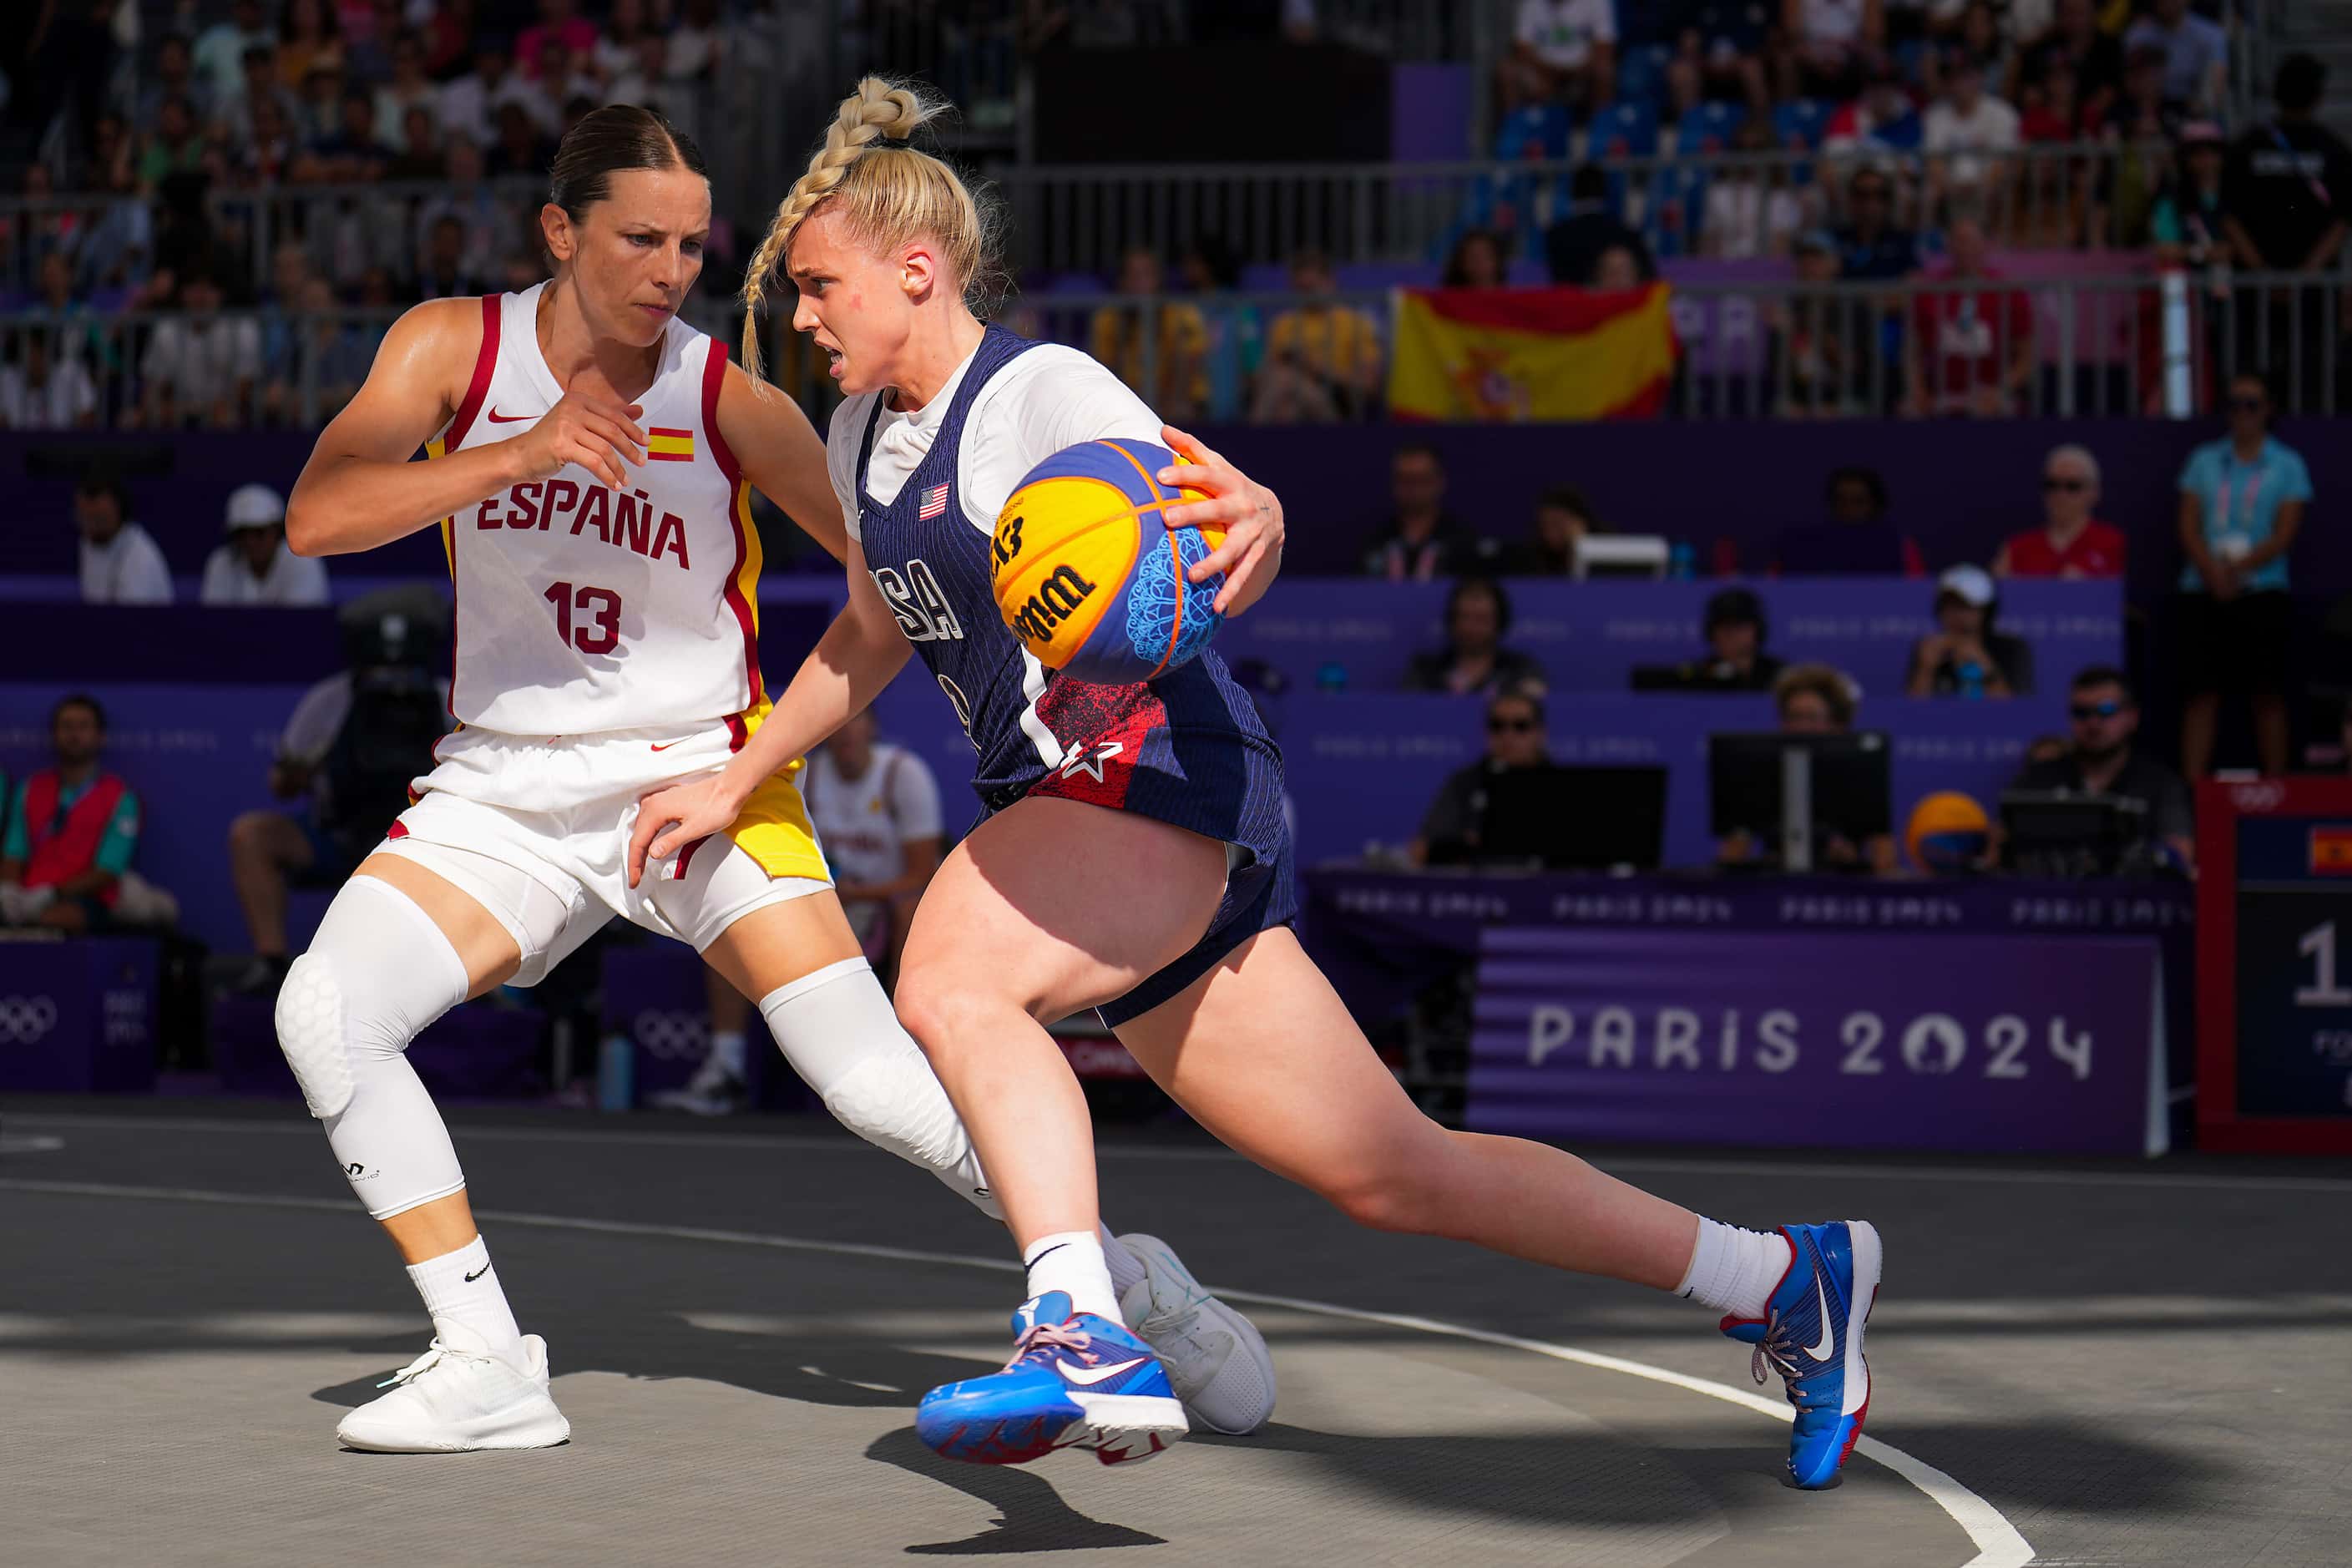 Hailey van Lith (9) of the United States is defended by Spain’s Sandra Ygueravide (13)...